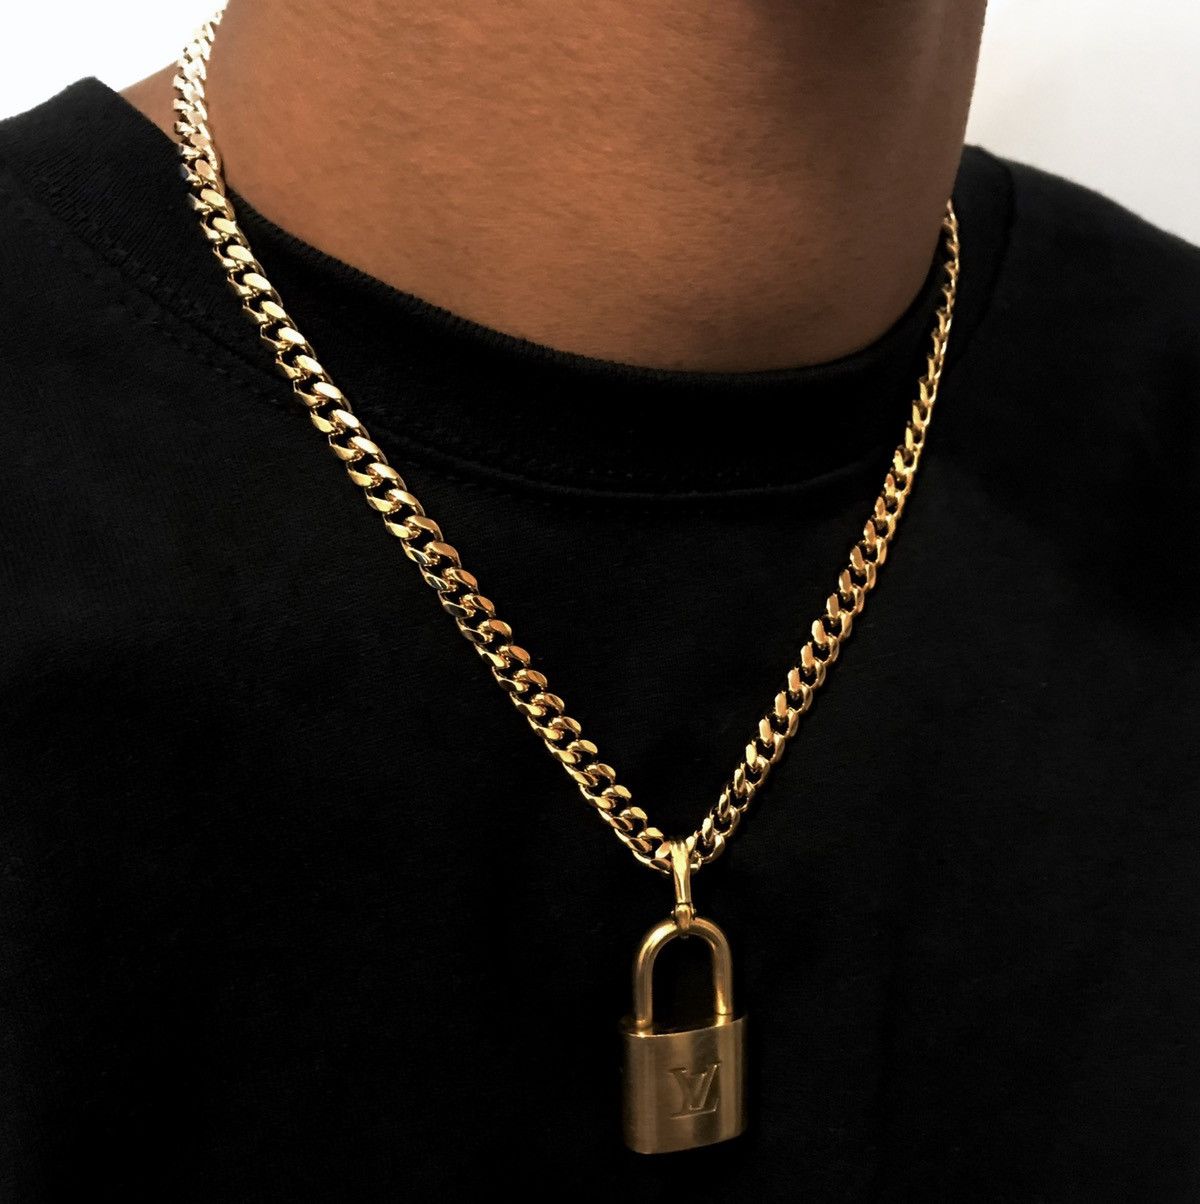 LOUIS VUITTON Padlock On CUBAN LINK NECKLACE Gold. Key is Not Included